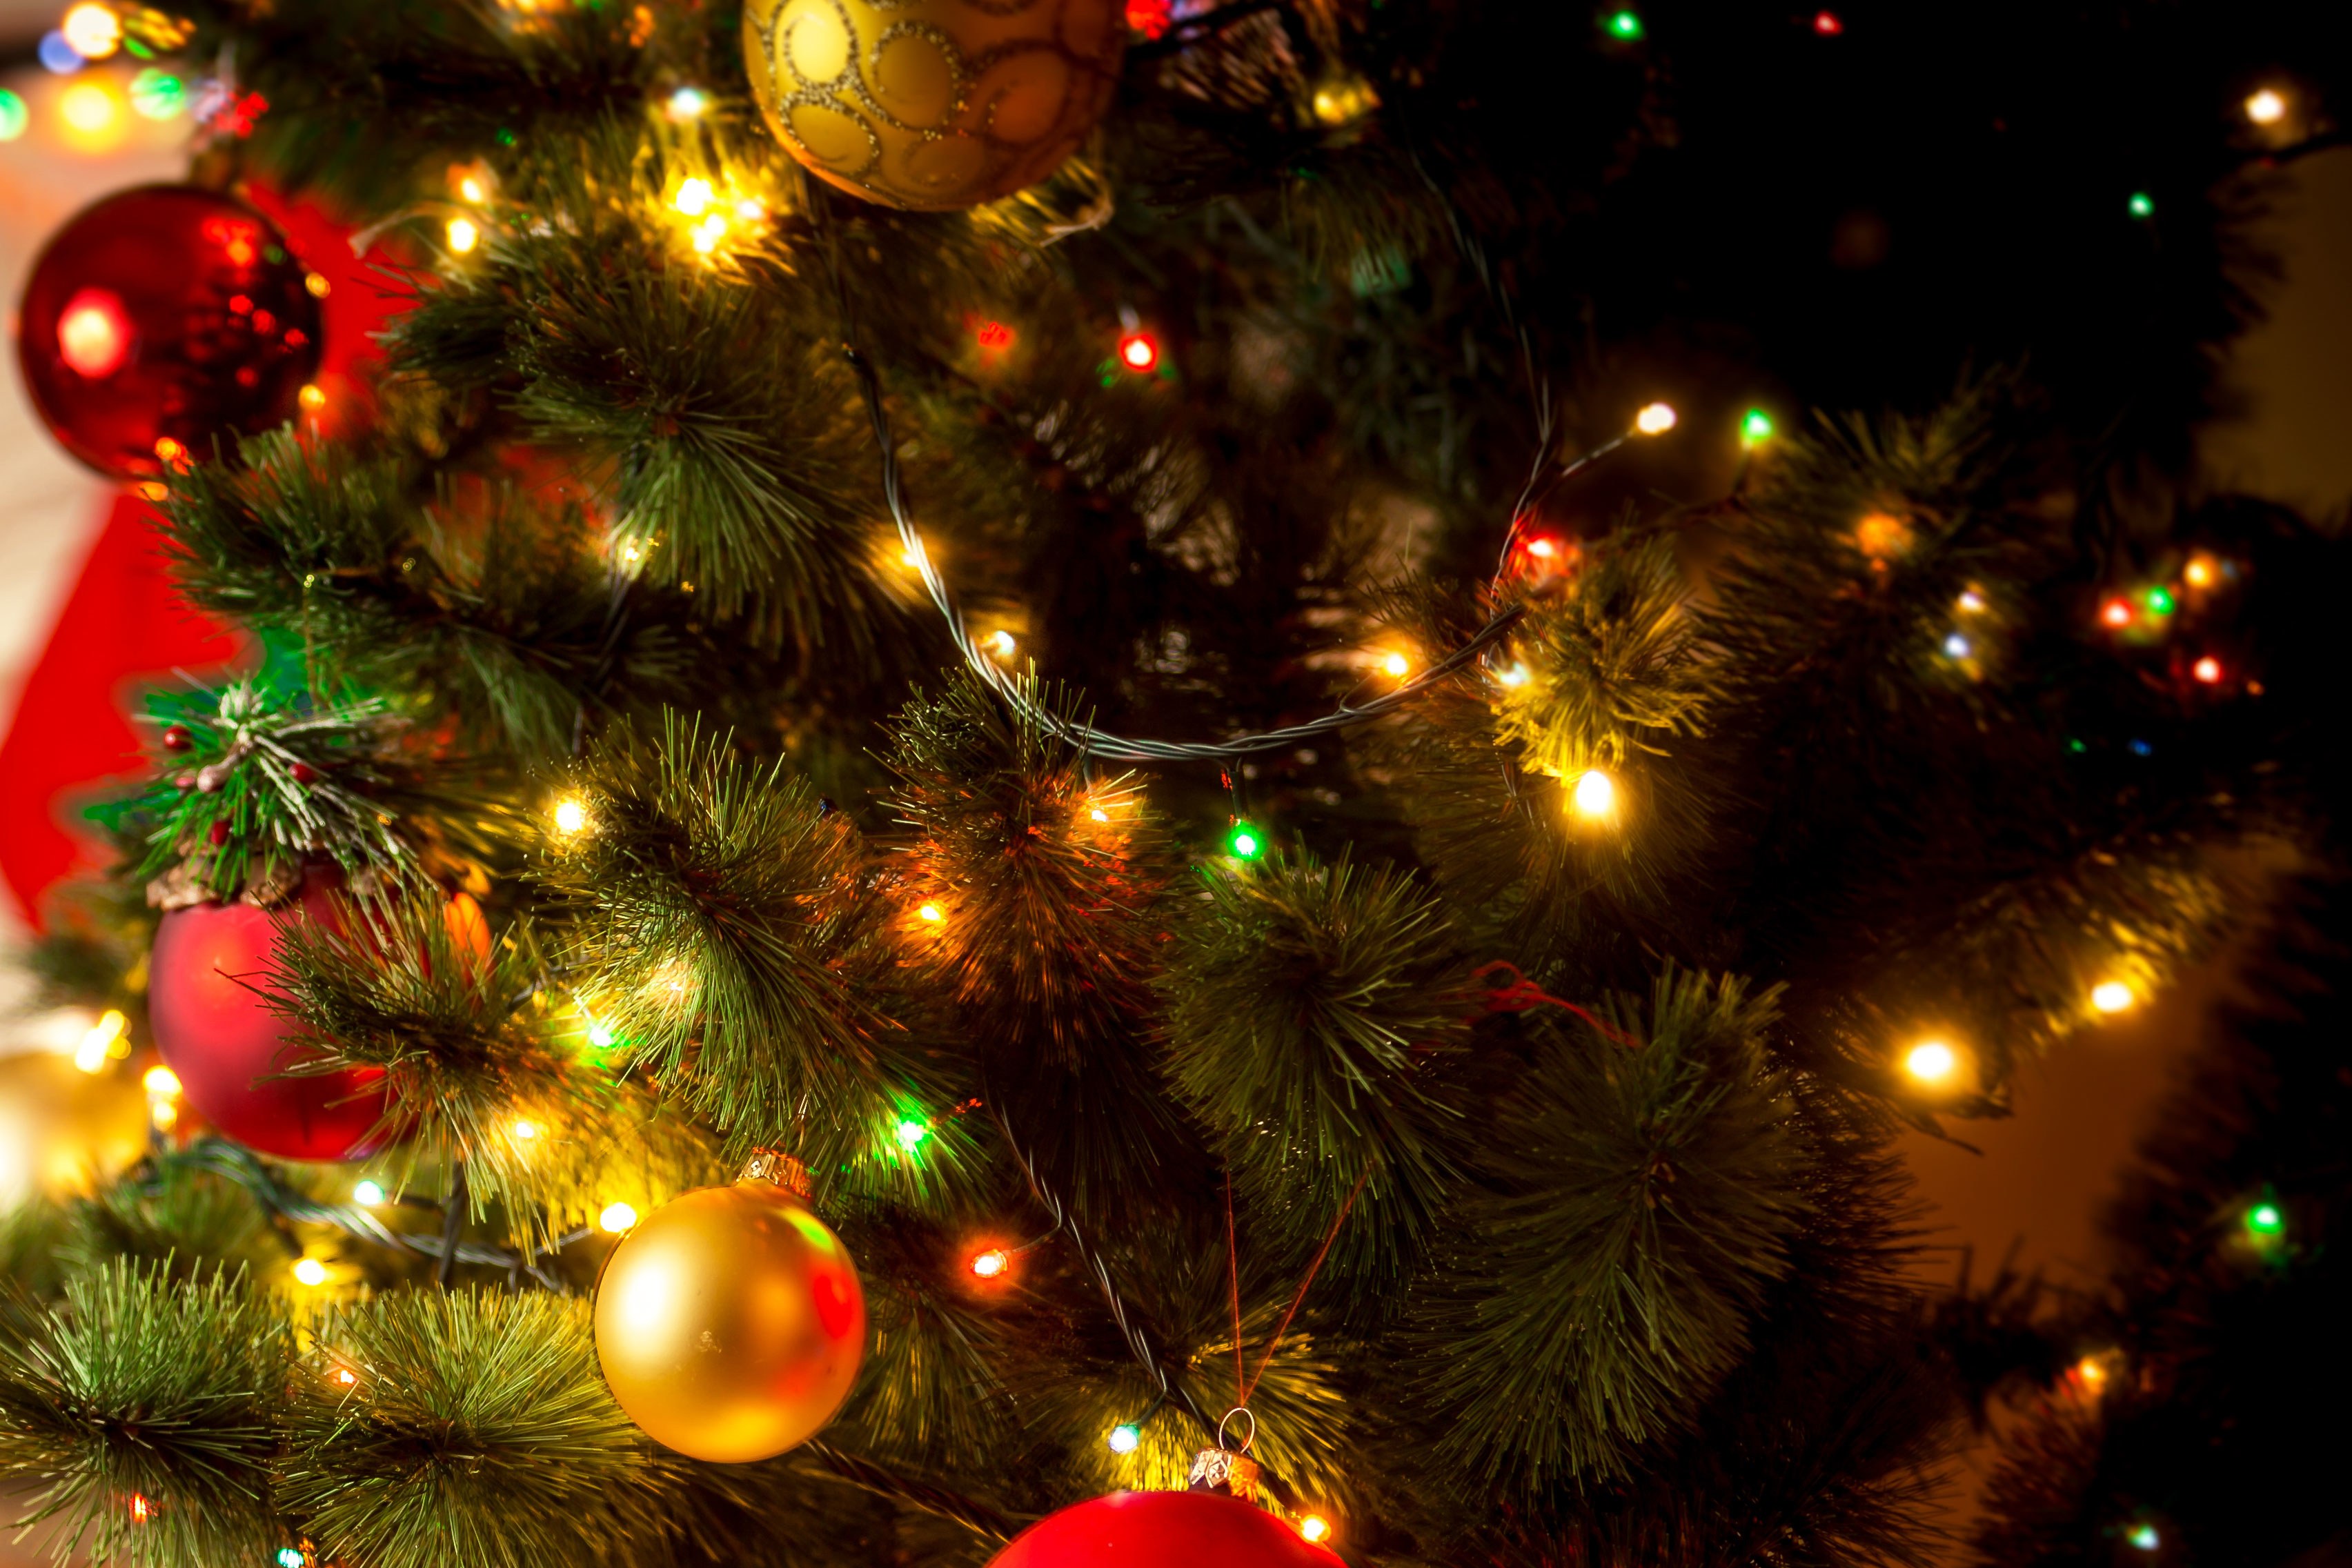 How Much Does It Cost to Power Your Christmas Lights? | WIRED